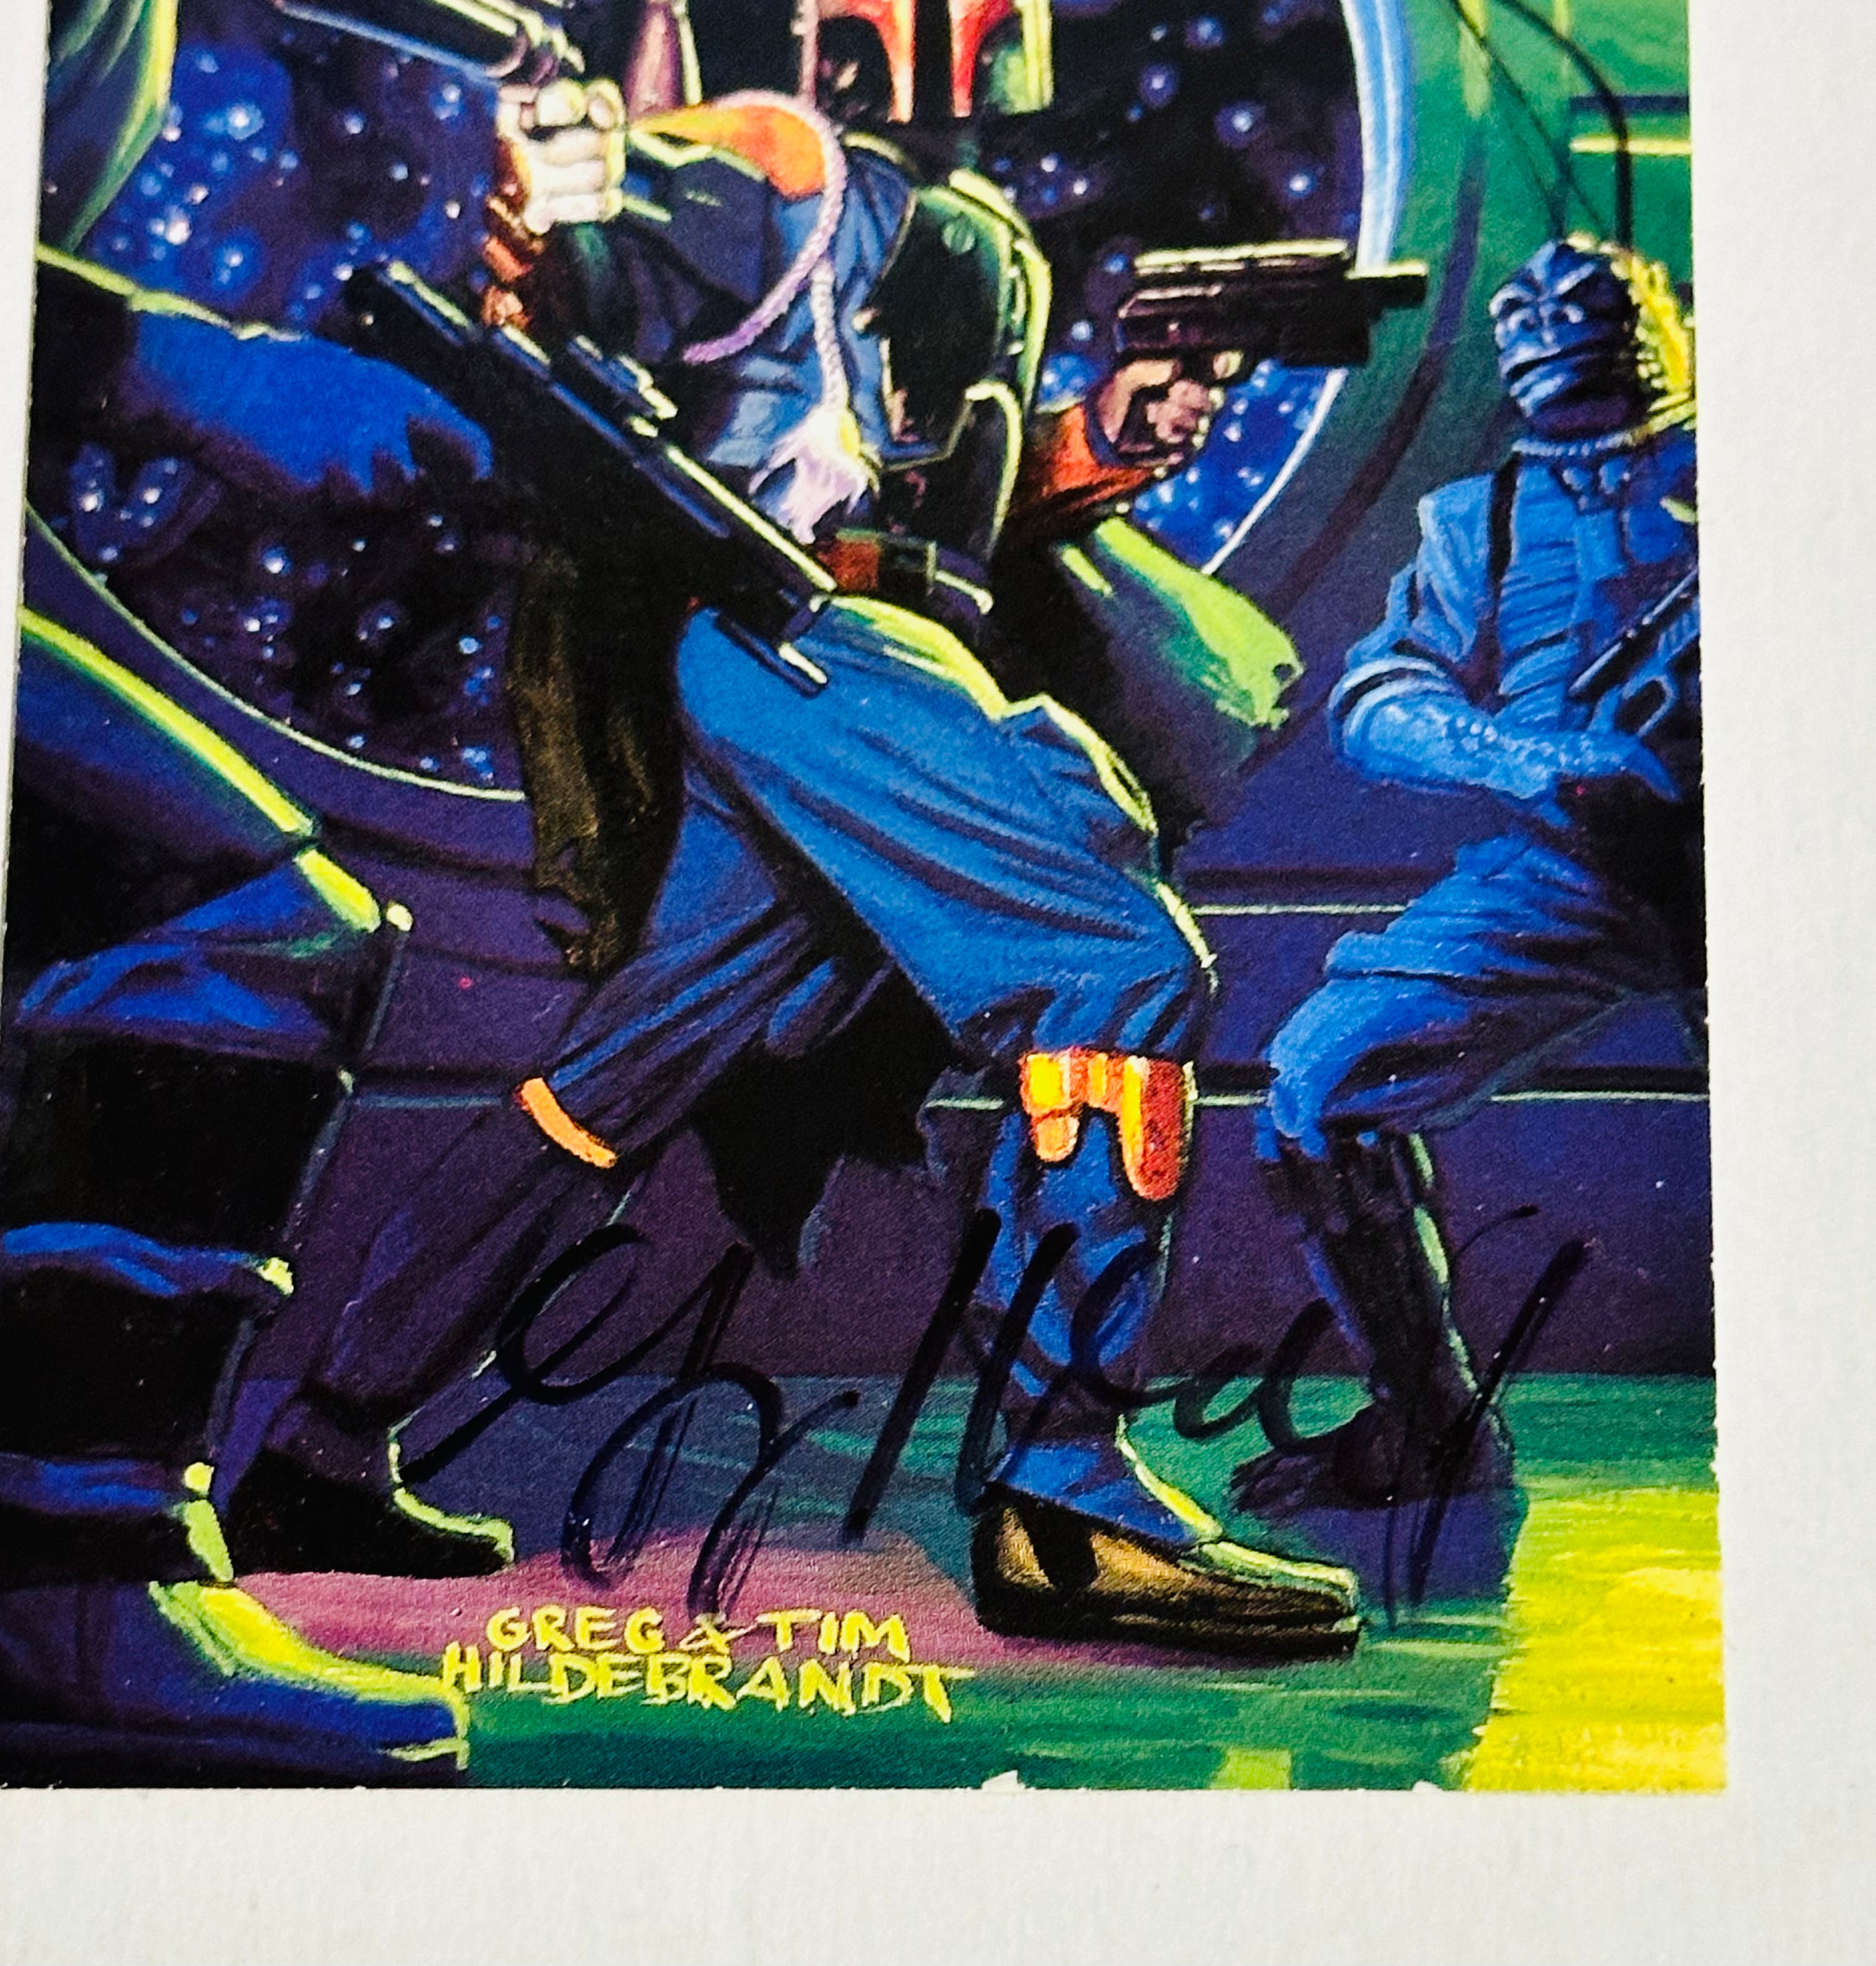 Star Wars rare double autograph card signed by Greg and Tim Hilderbrandt famous Artists sold with COA